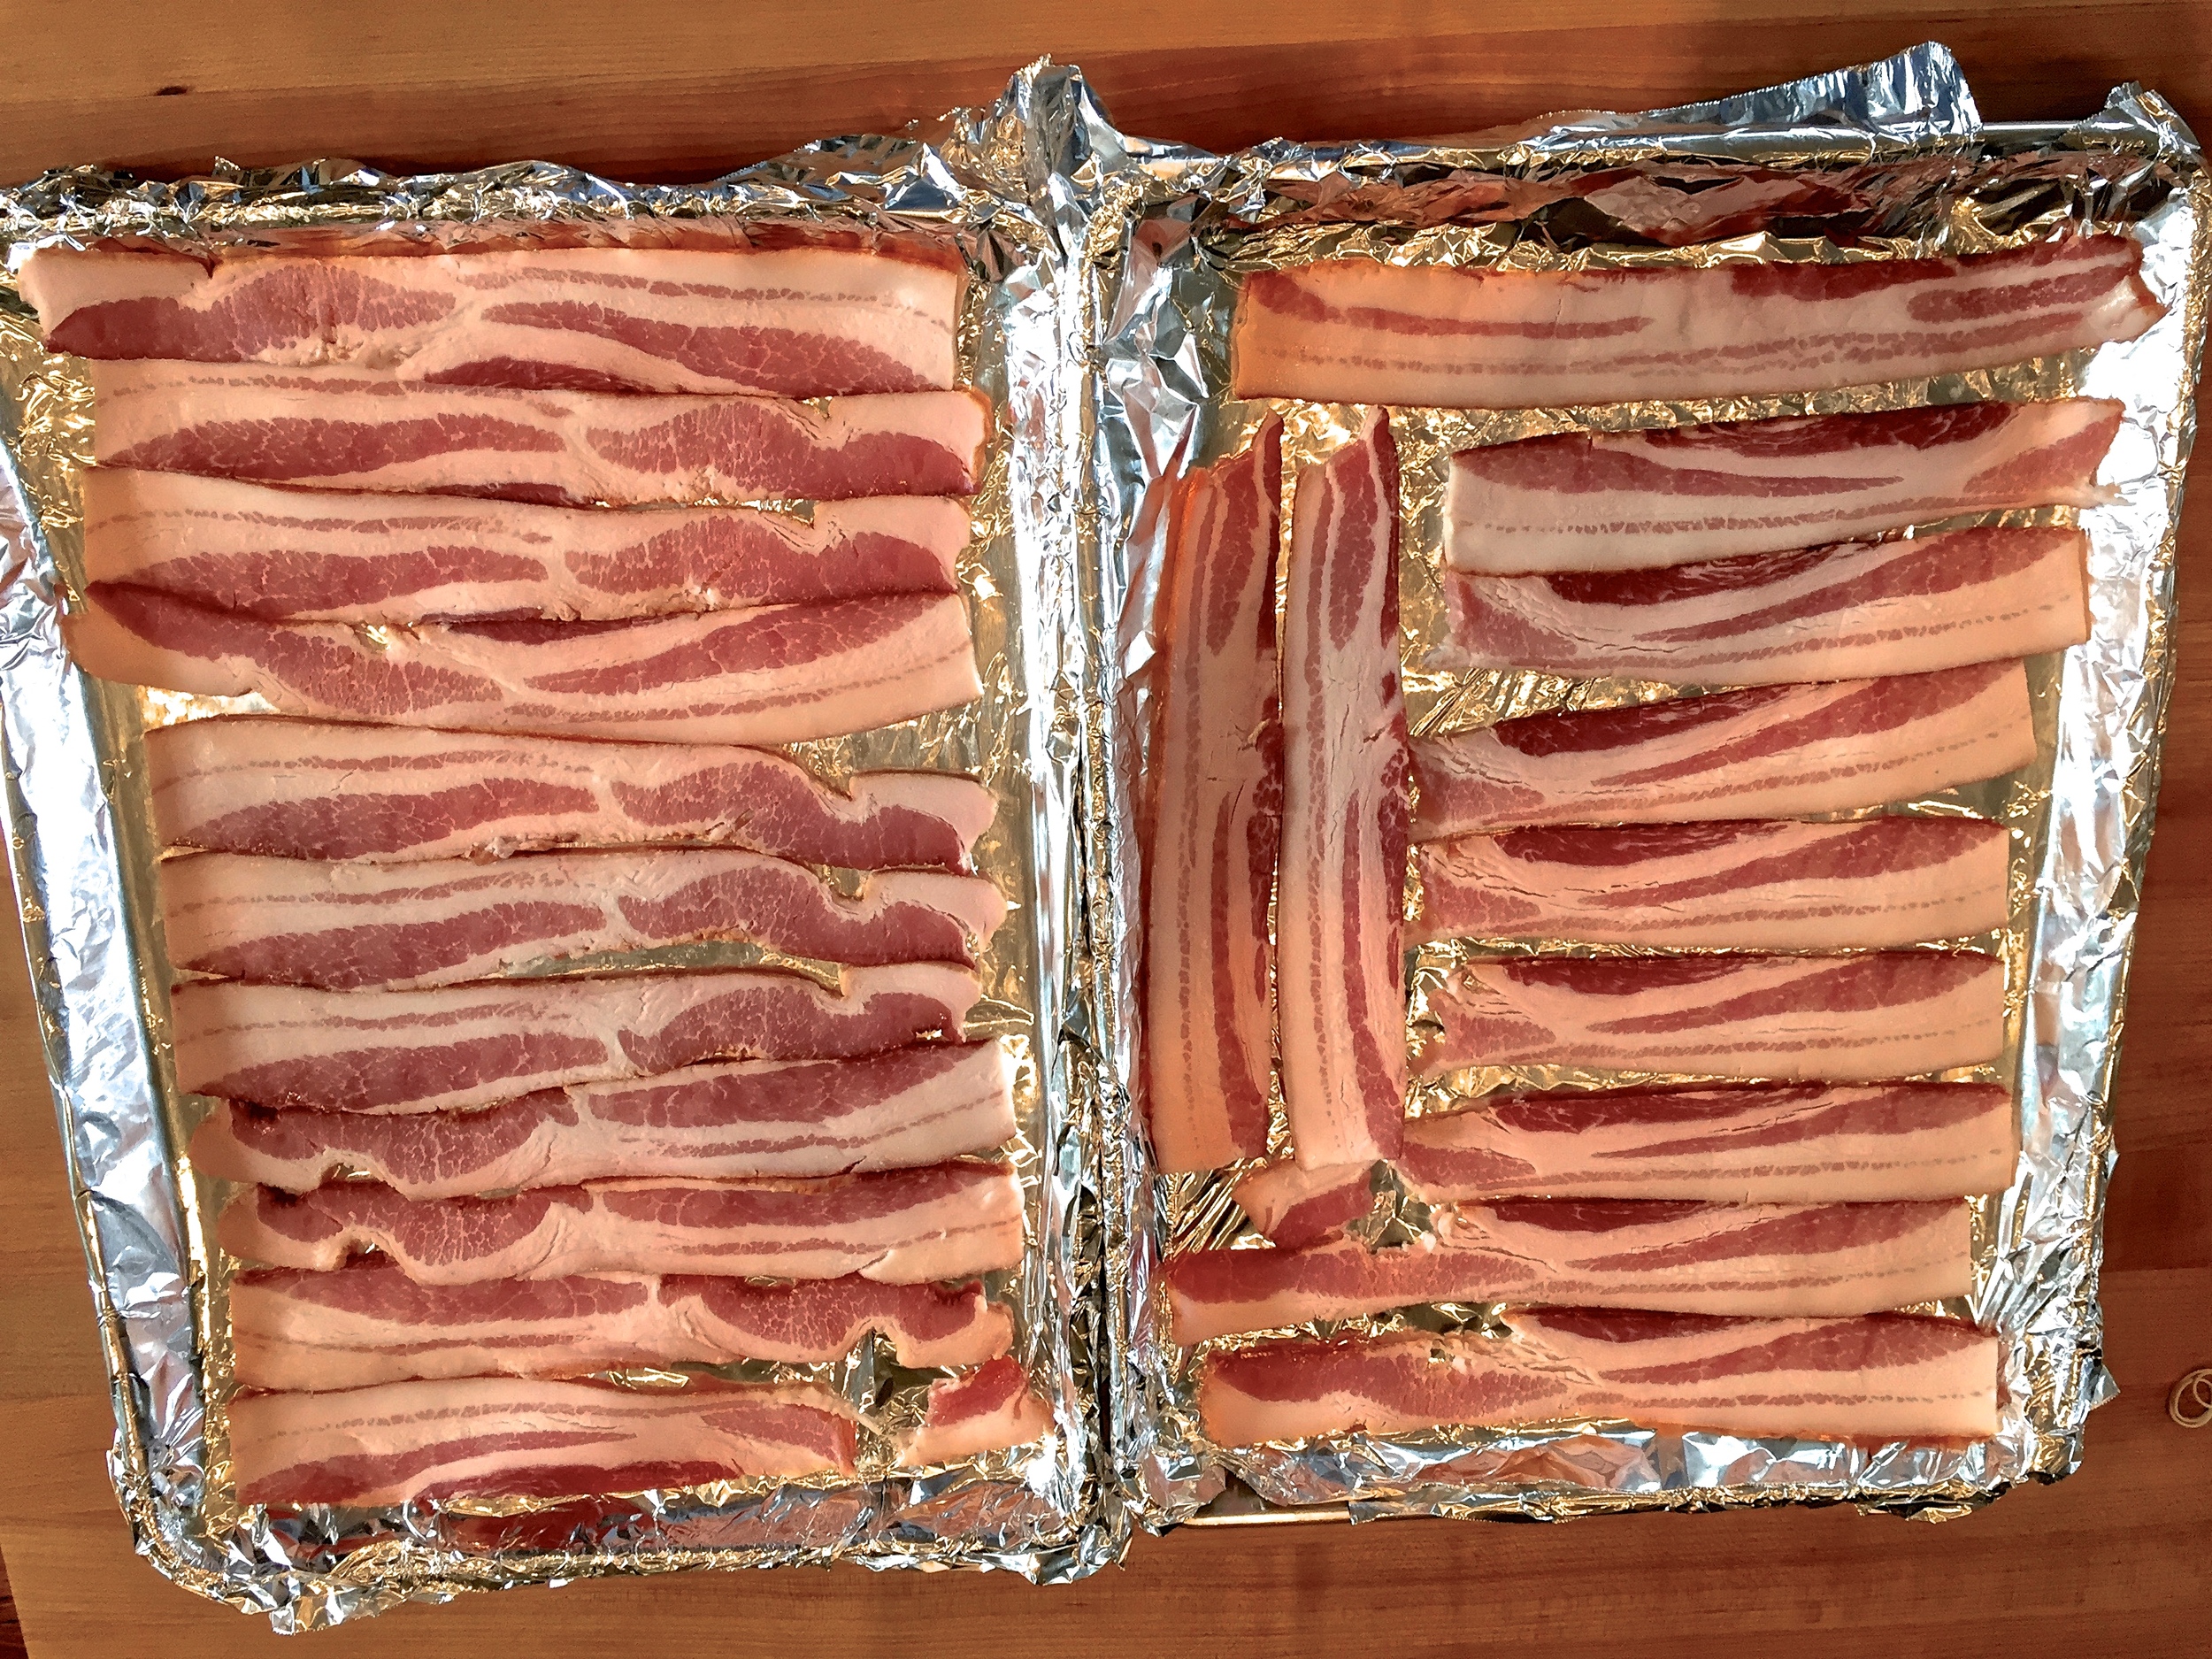 Lay out the bacon on foil